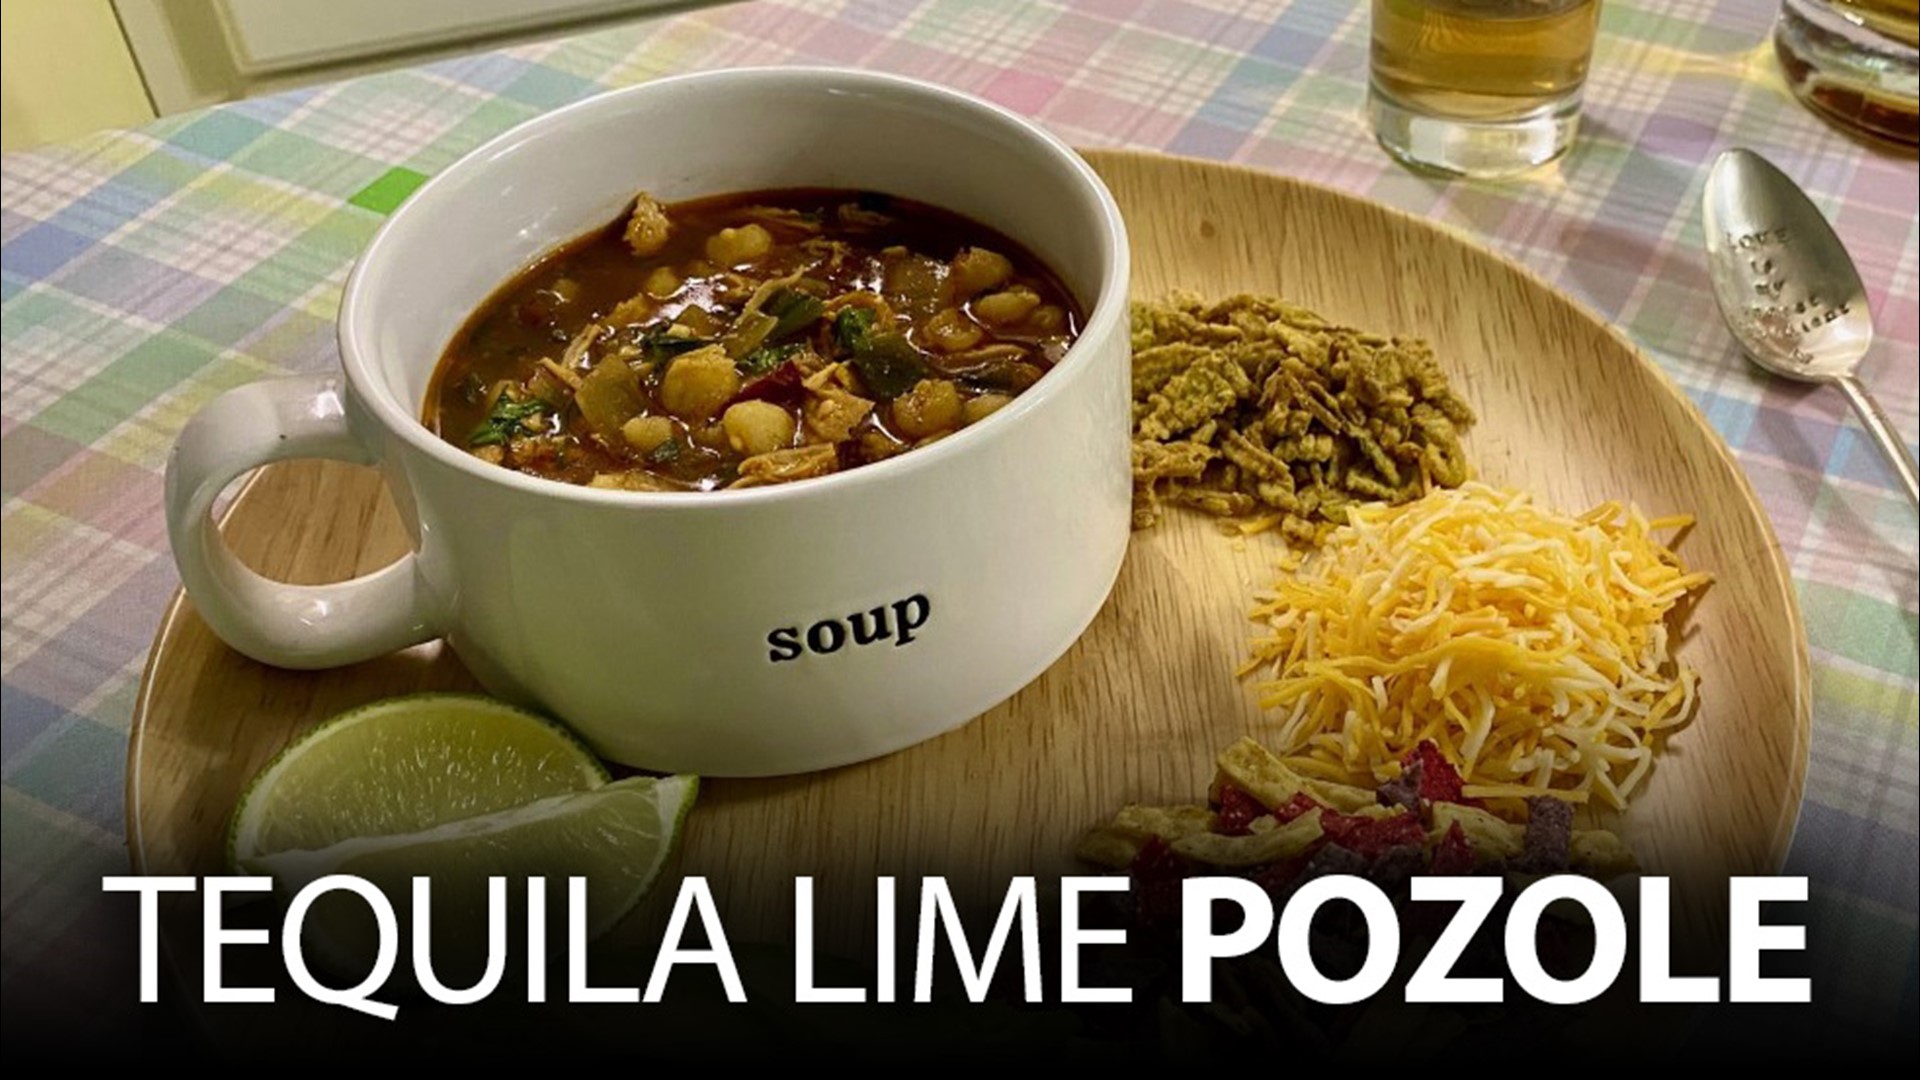 It's National Tequila Day! So we're making a tequila lime pozole to celebrate.